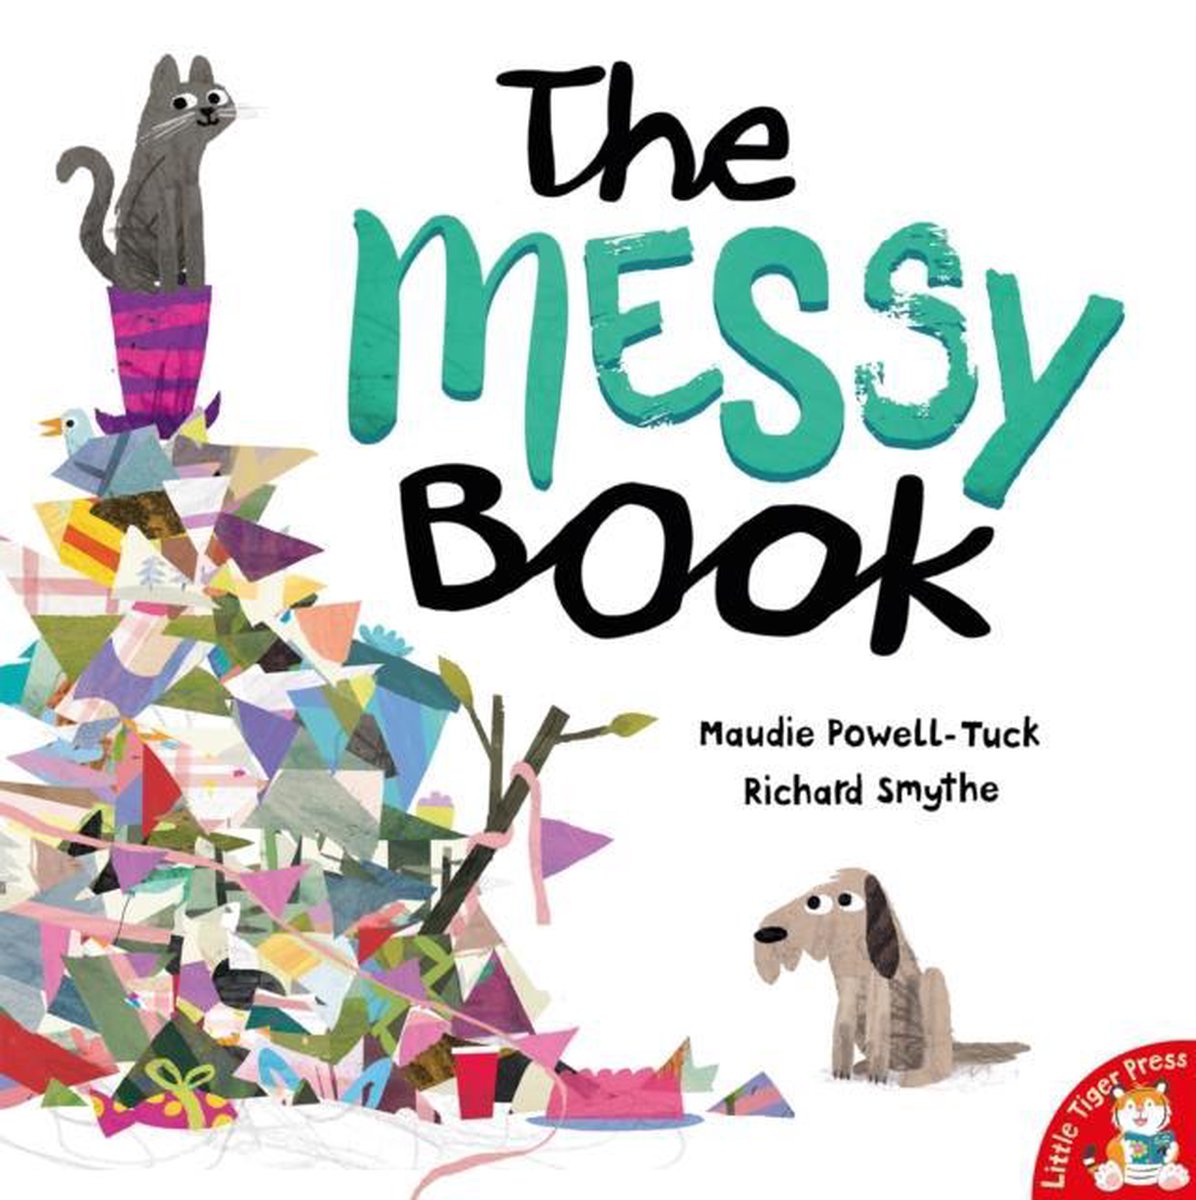 Messy Book - Maudie Powell-Tuck